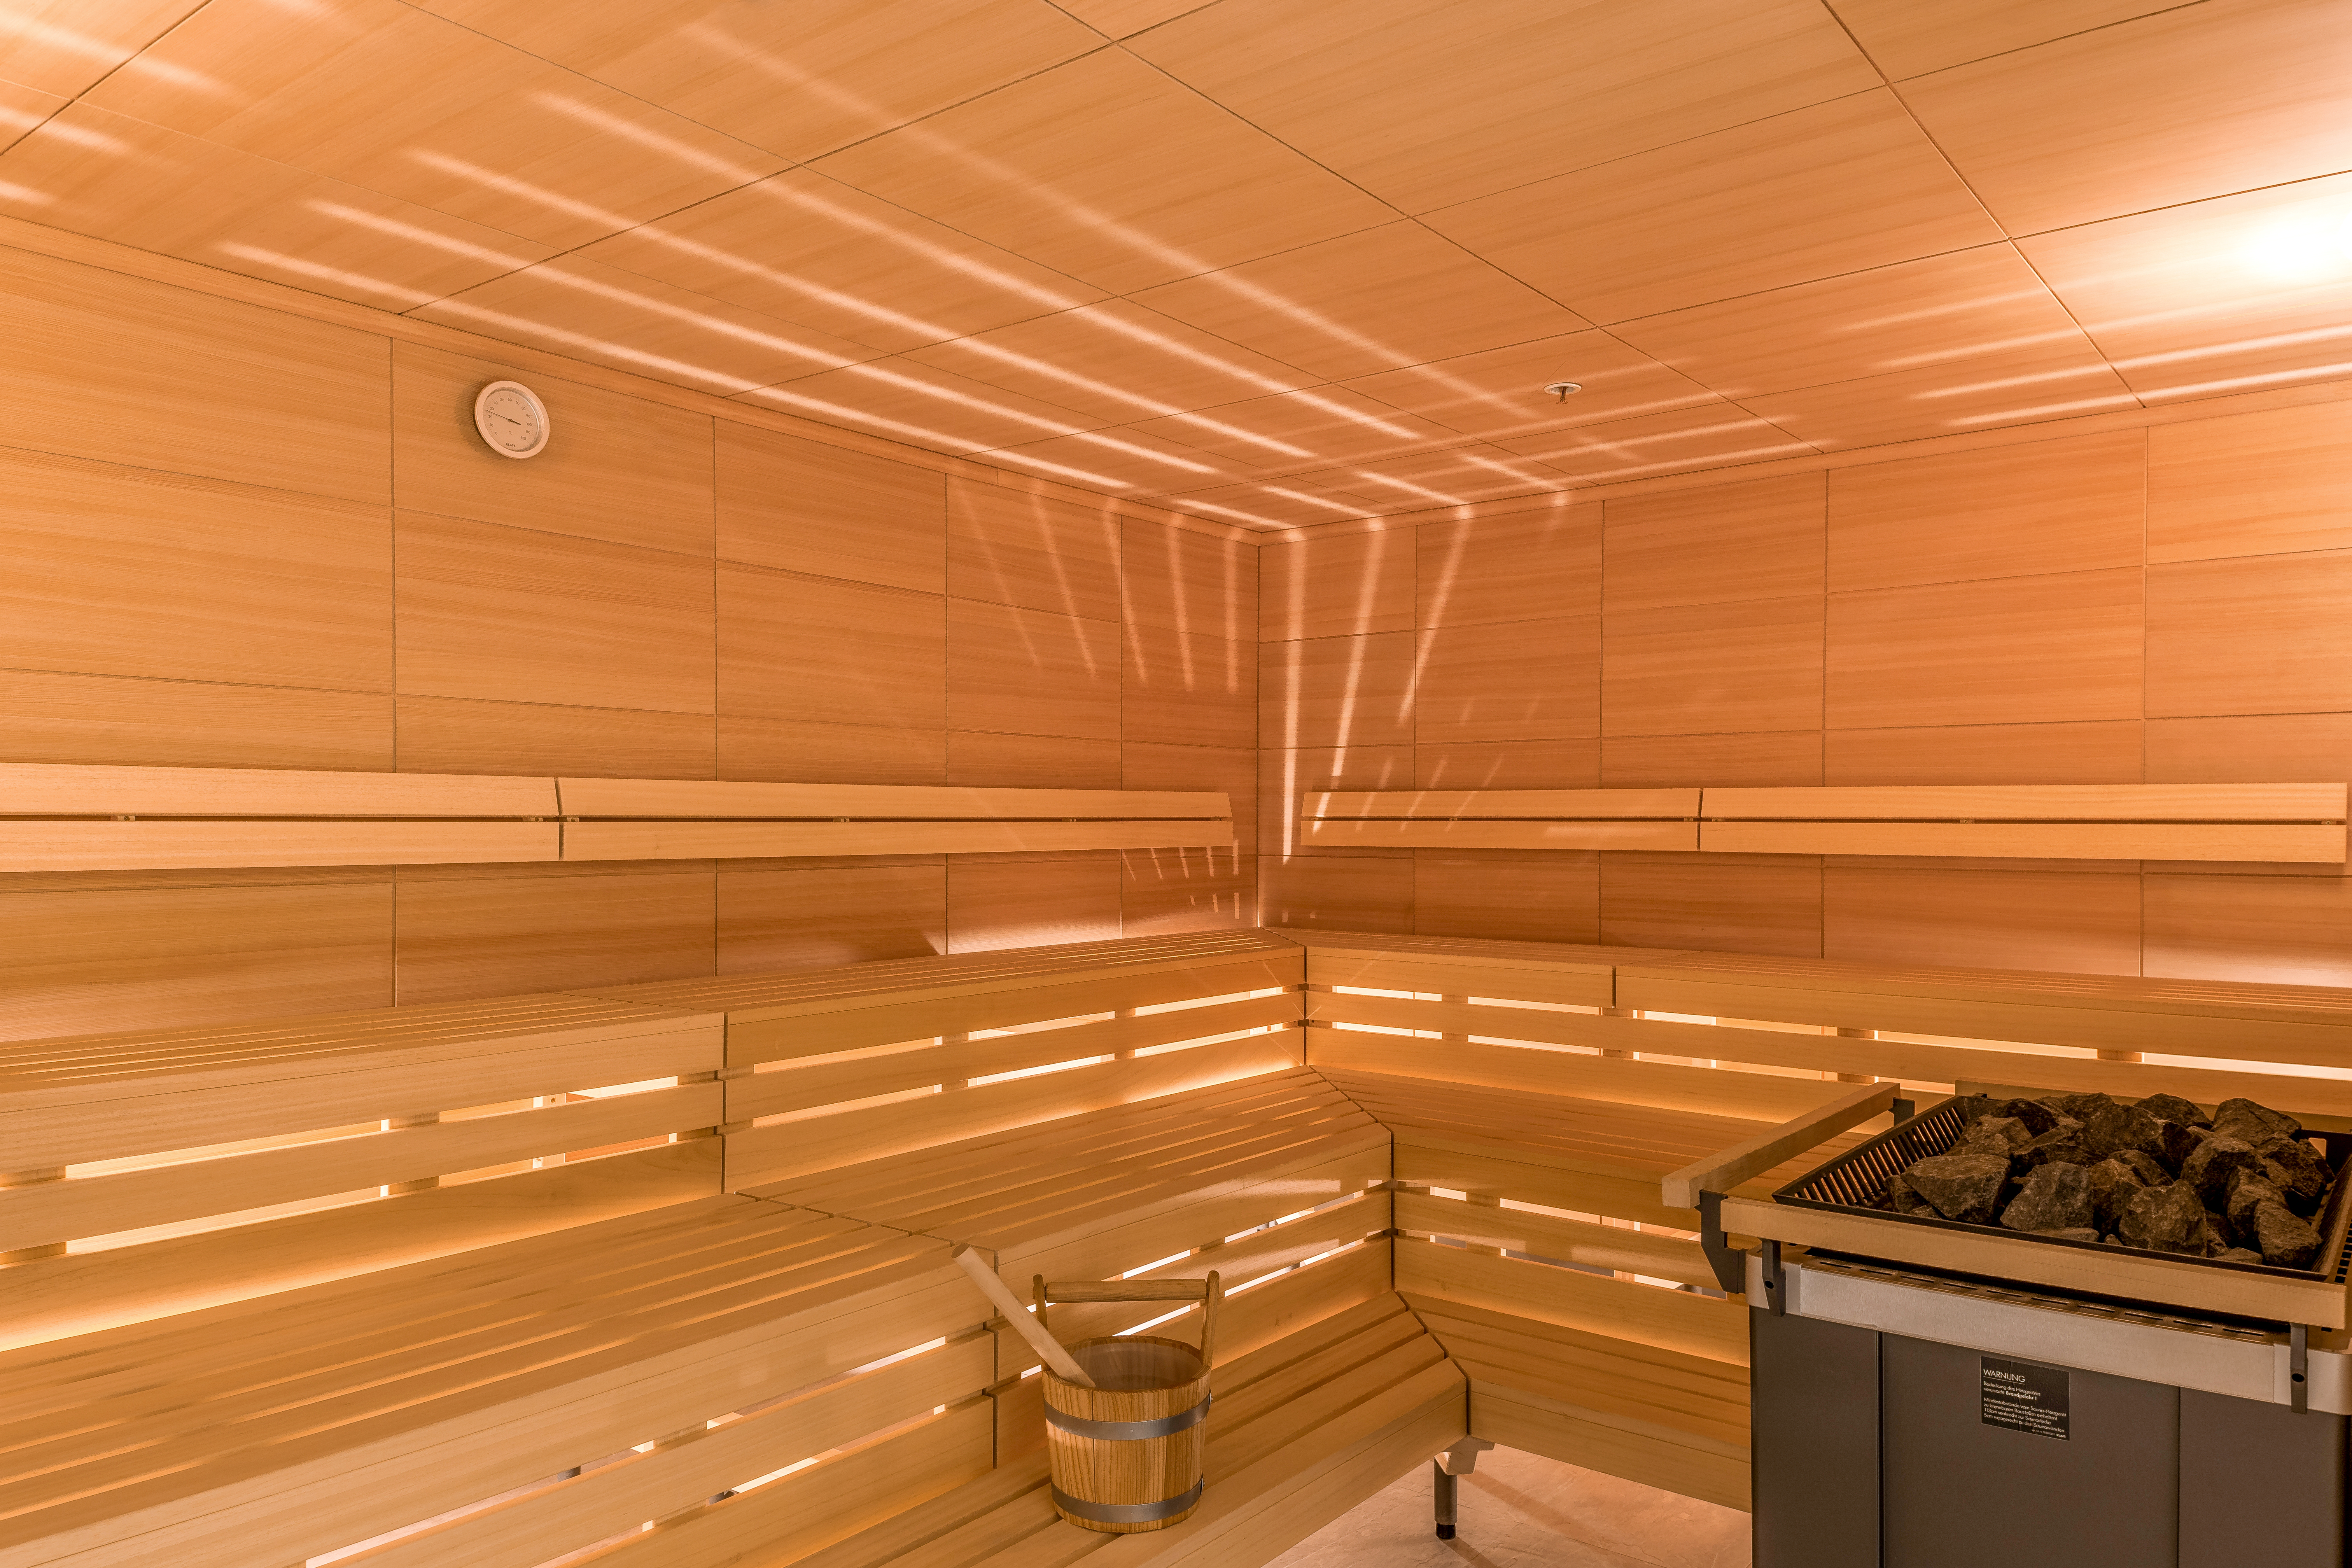 Wooden Sauna Interior With Ladle in a Bucket and Heater at Atmosphere SPA